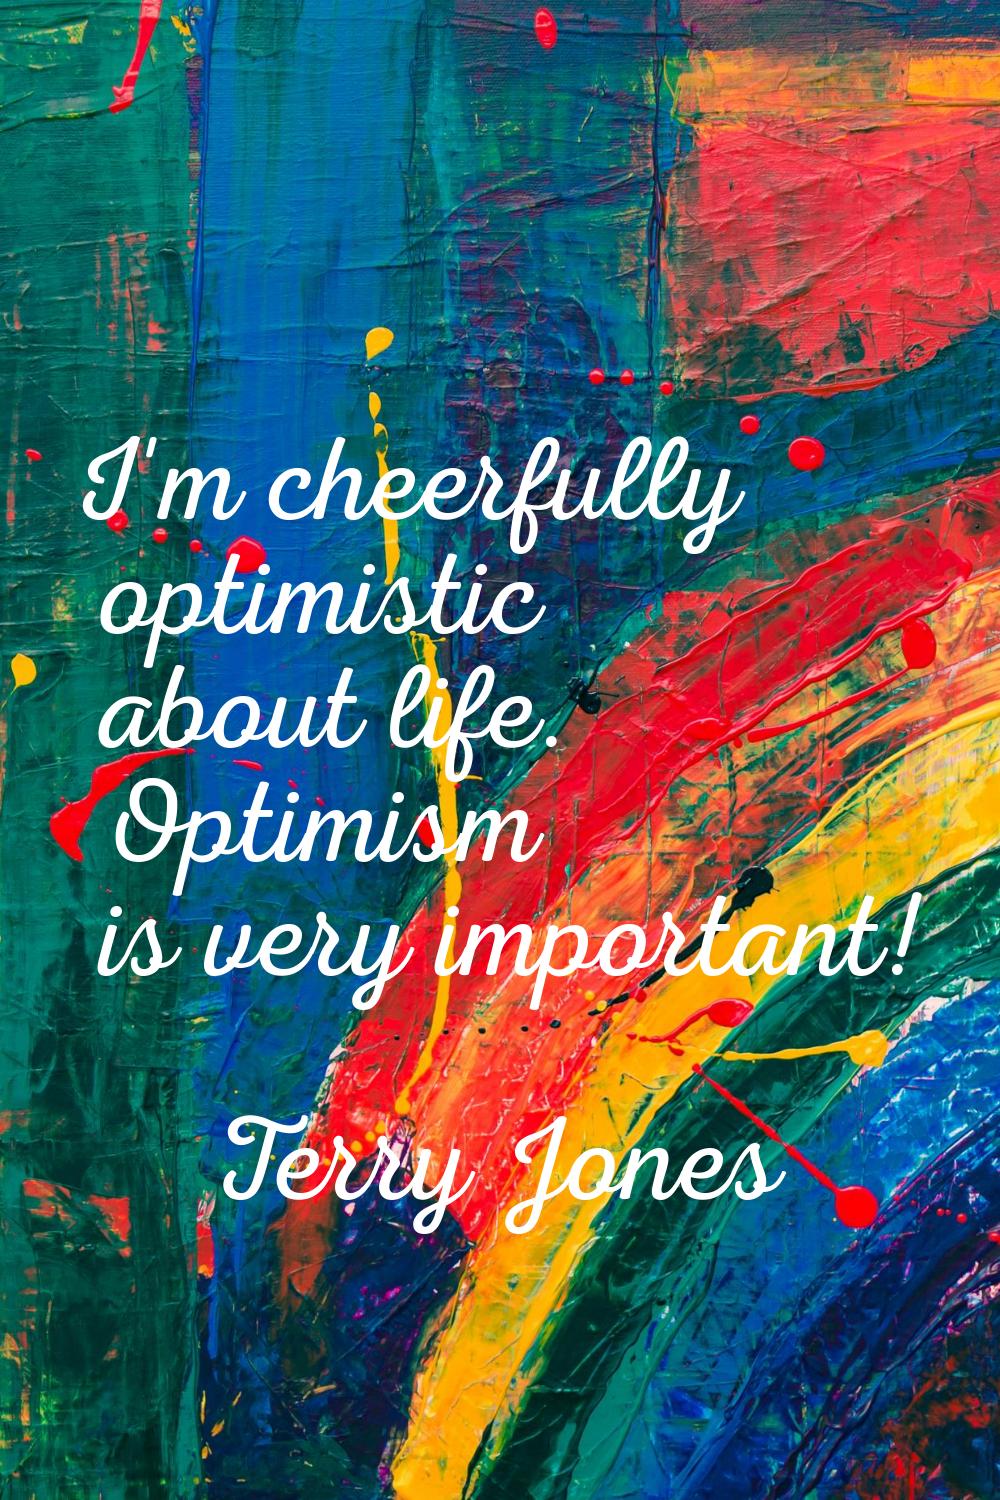 I'm cheerfully optimistic about life. Optimism is very important!